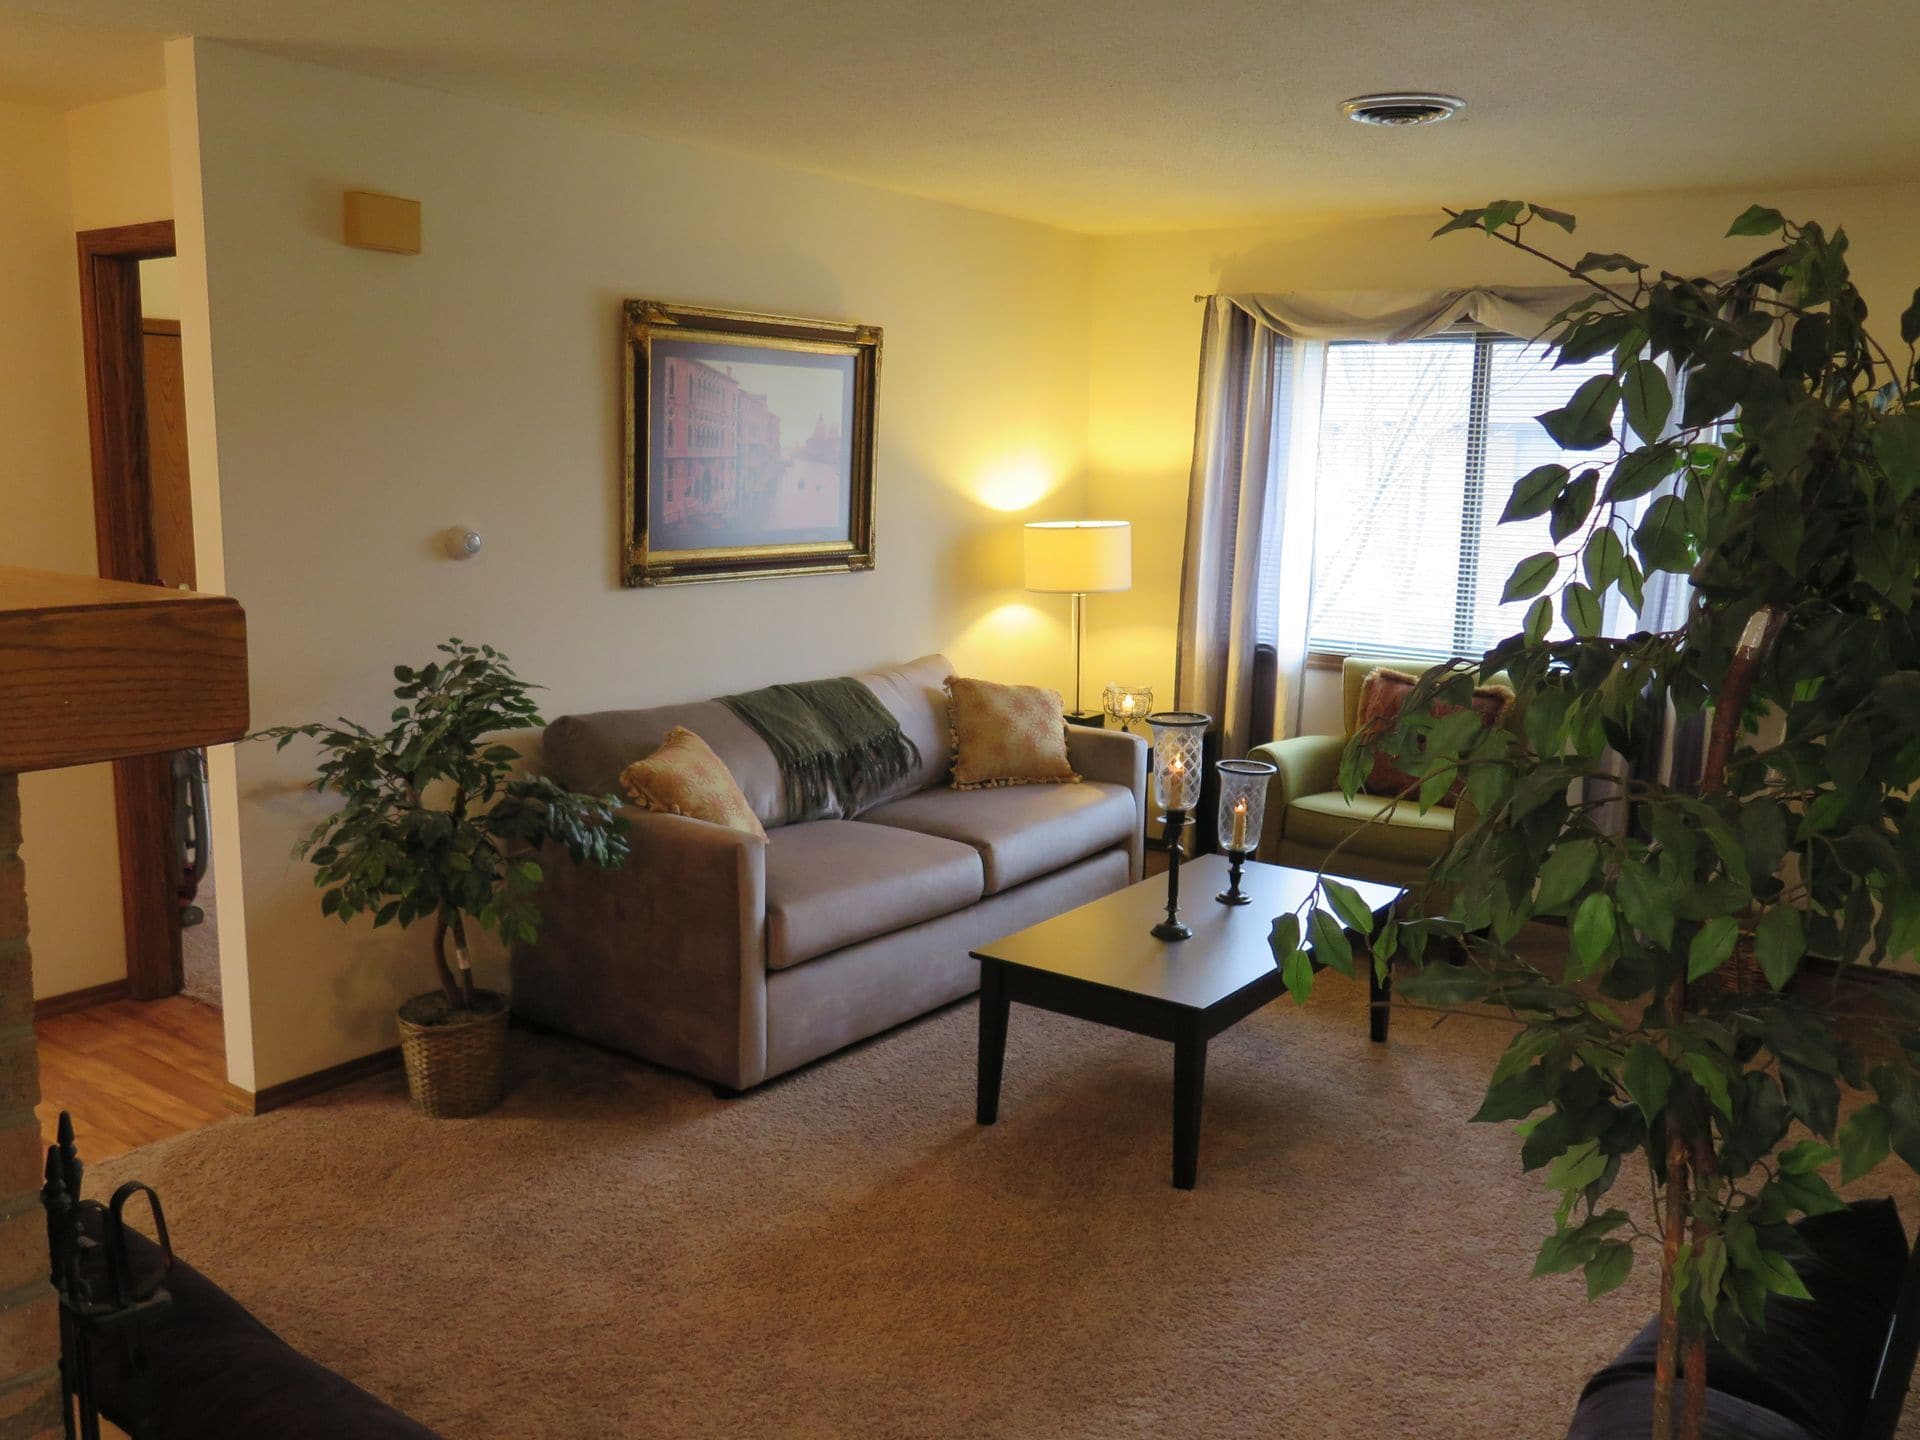 Willow Springs Condos - Urbana, IL, US, homes for sale